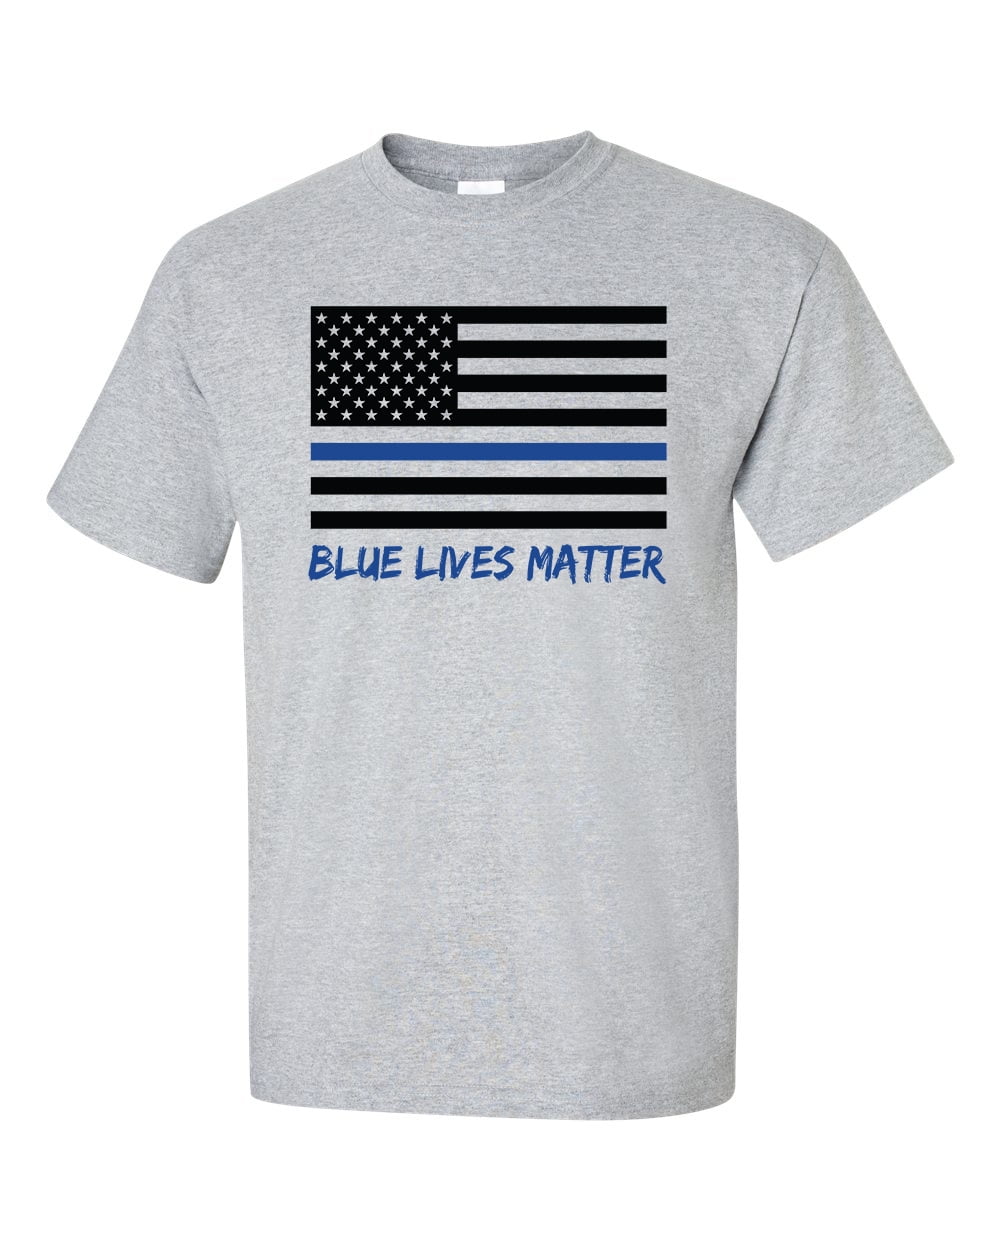 Thin Blue Line Men's Distressed American Flag Dry Wicking Tee Athletic T-Shirt 